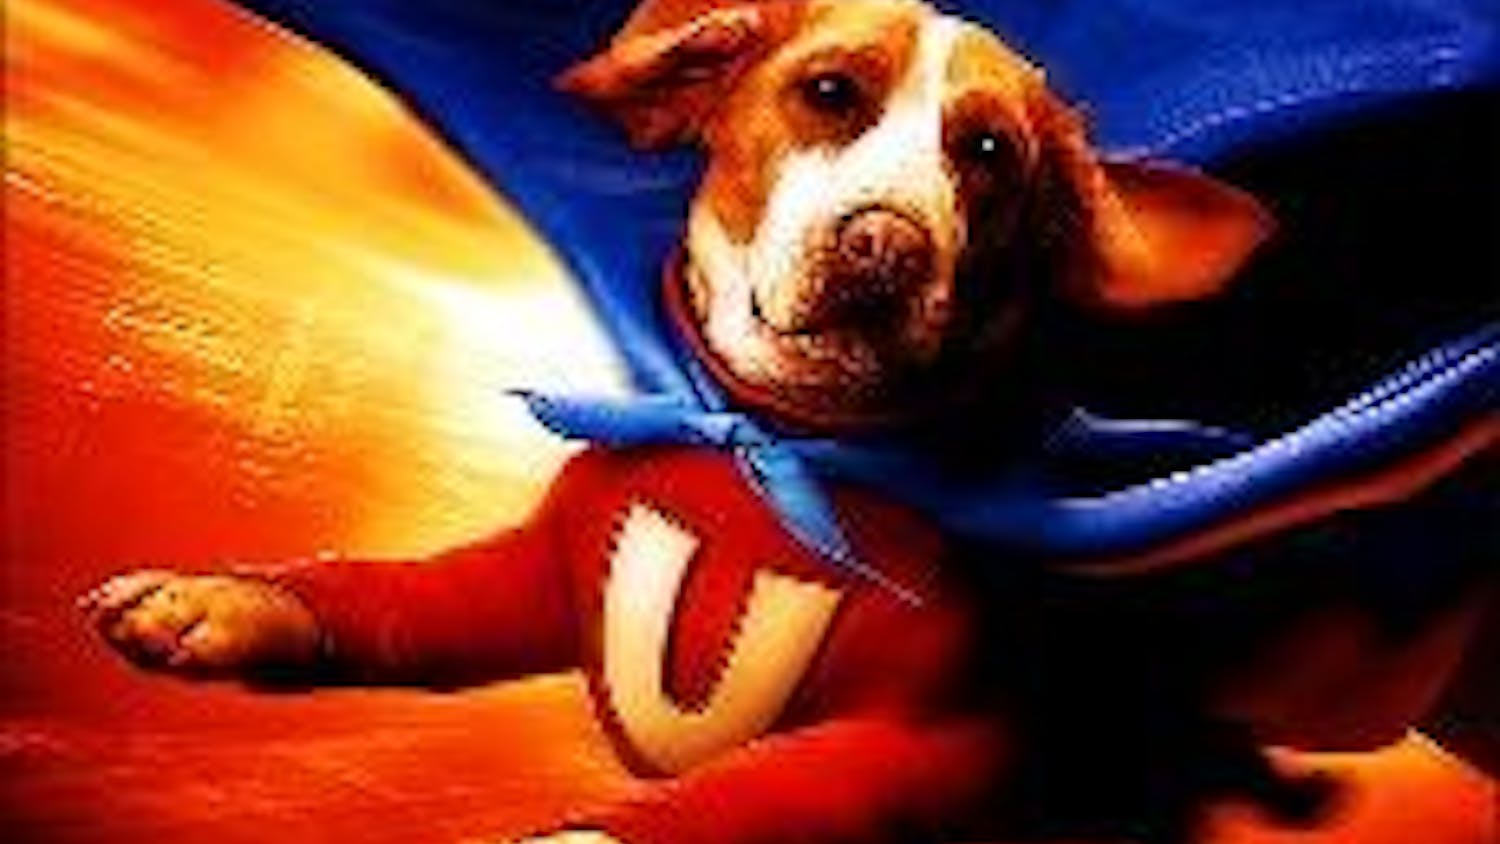 Underdog looks to save the day in what is sure to be a summer blockbuster.